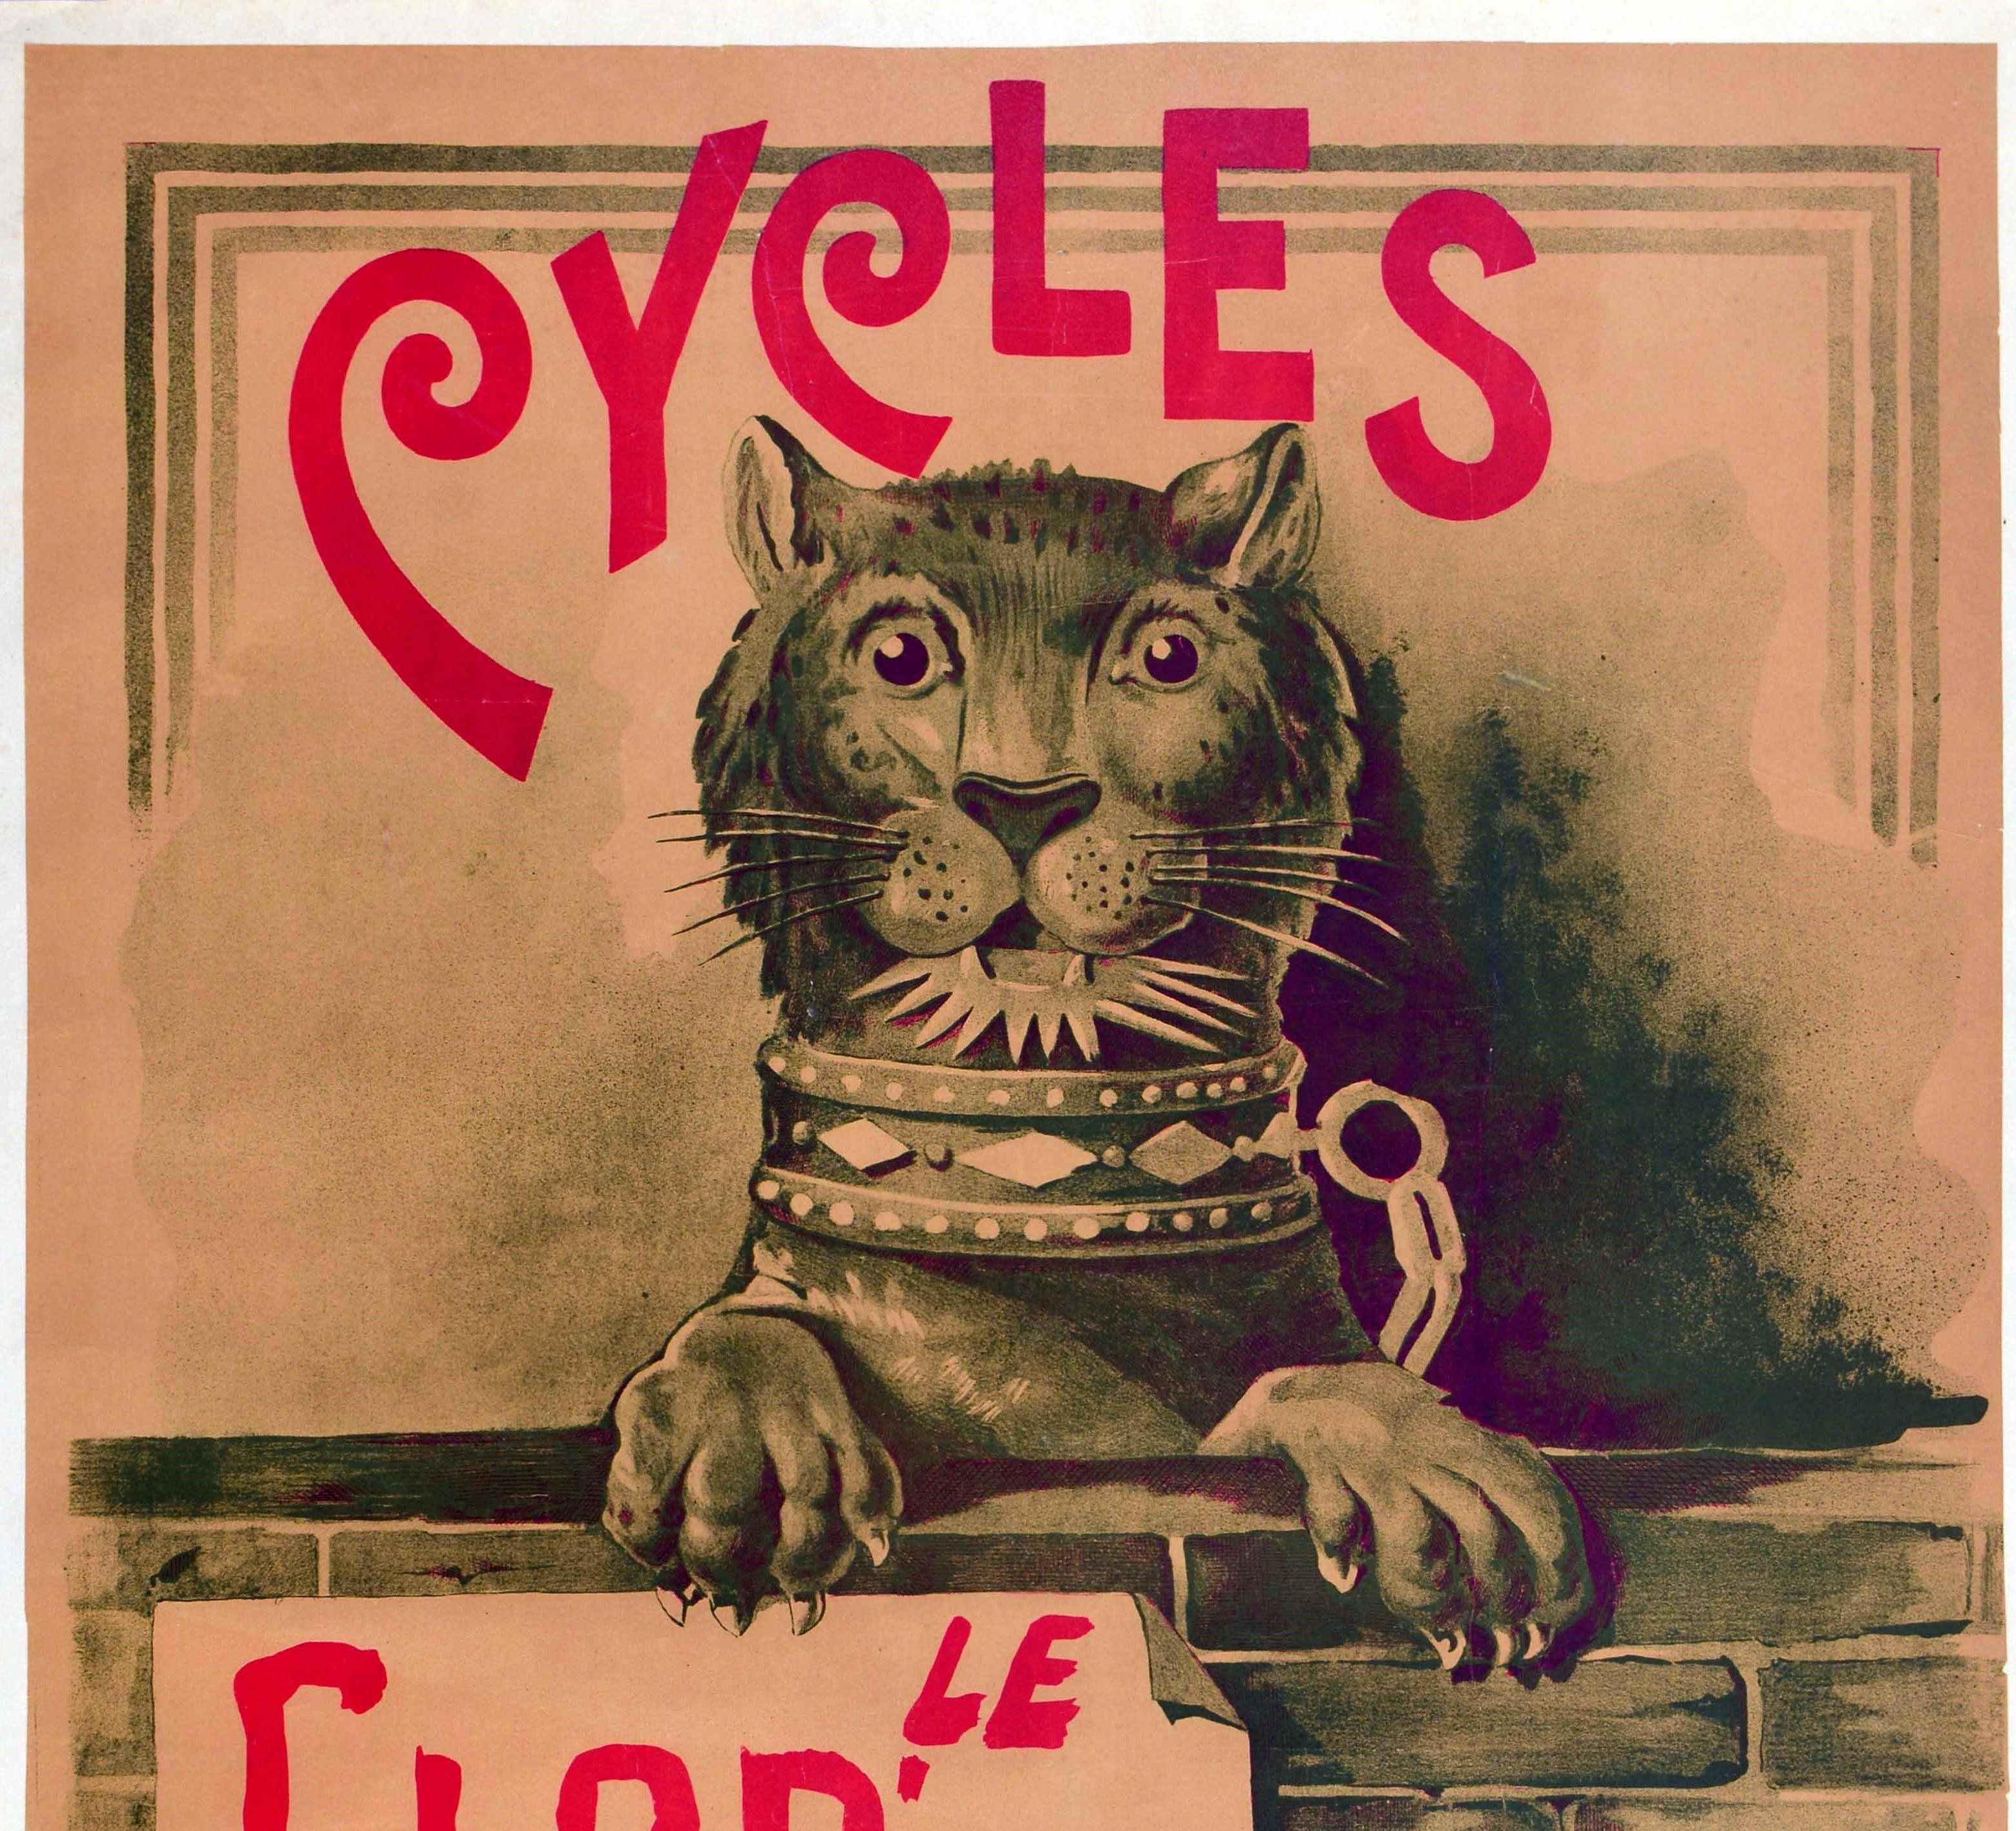 Original antique bicycle advertising poster for Le Glob' Trotter Cycles Paris featuring great artwork of a lioness looking out to the viewer, her paws clawing on the top of a brick wall with a sign for The Globe Trotter pasted on it, and the bold